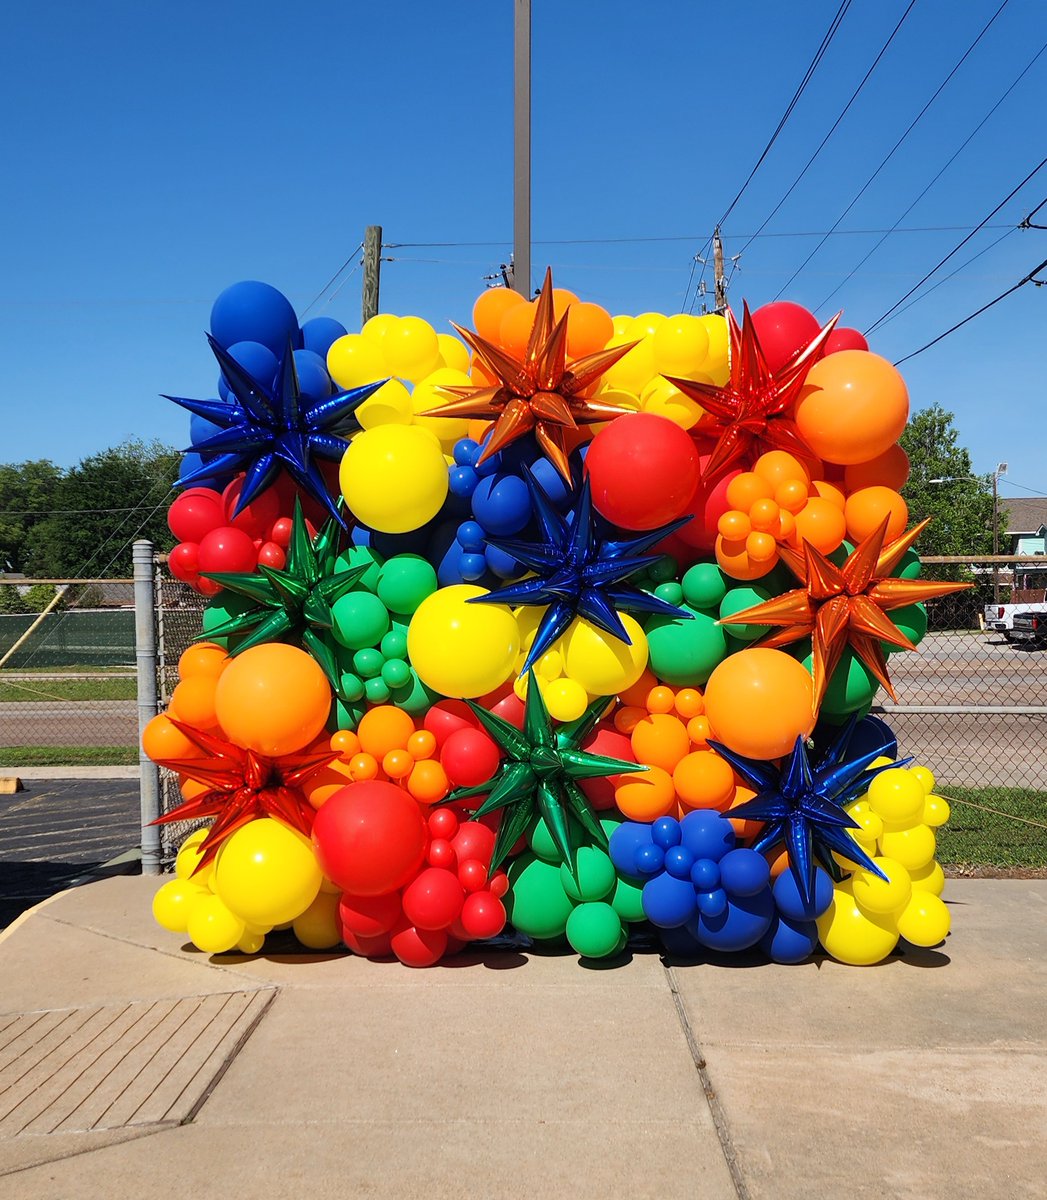 Amazing Balloon Wall! 

Please visit our website for requests: houstondecoballoons.com

#balloonwall #wow #Amazing #balloons #Houston #SmallBusiness #balloonart #art